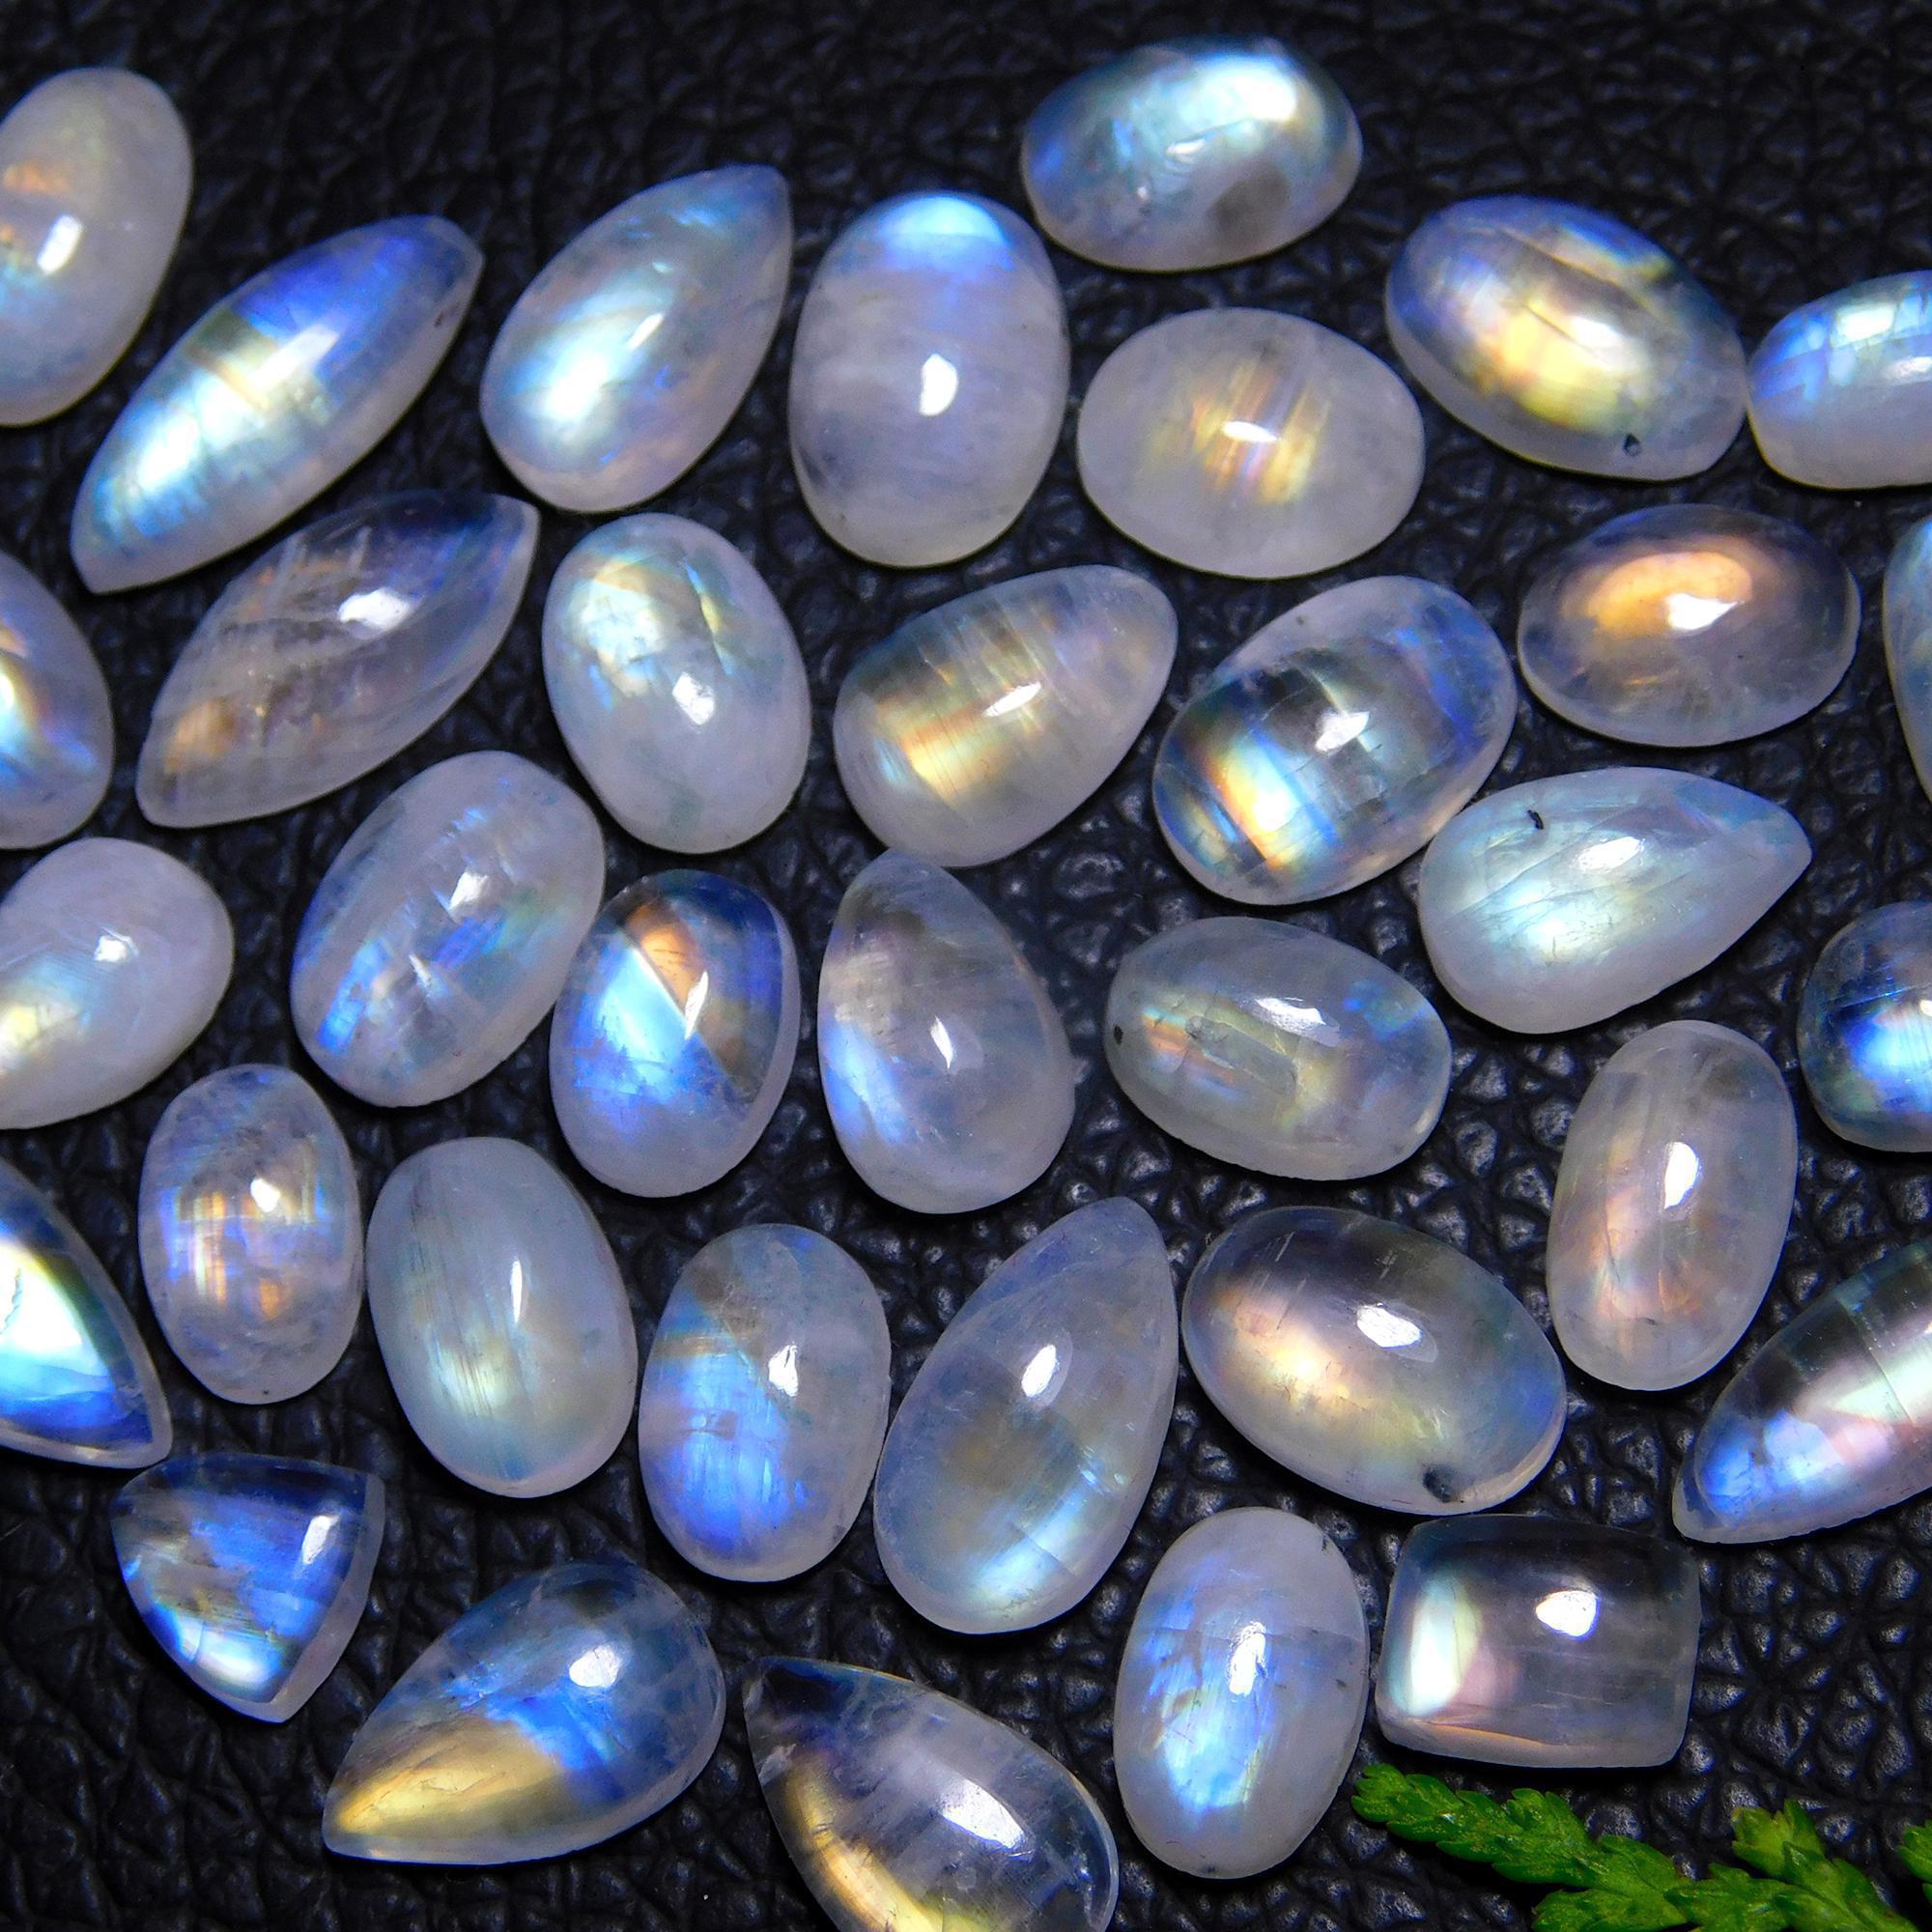 36Pcs 73Cts Natural Rainbow Moonstone Cabochon Blue Fire Loose Gemstone Crystal jewelry supplies wholesale lot gift for her Black Friday 14X5 7X5mm#9427